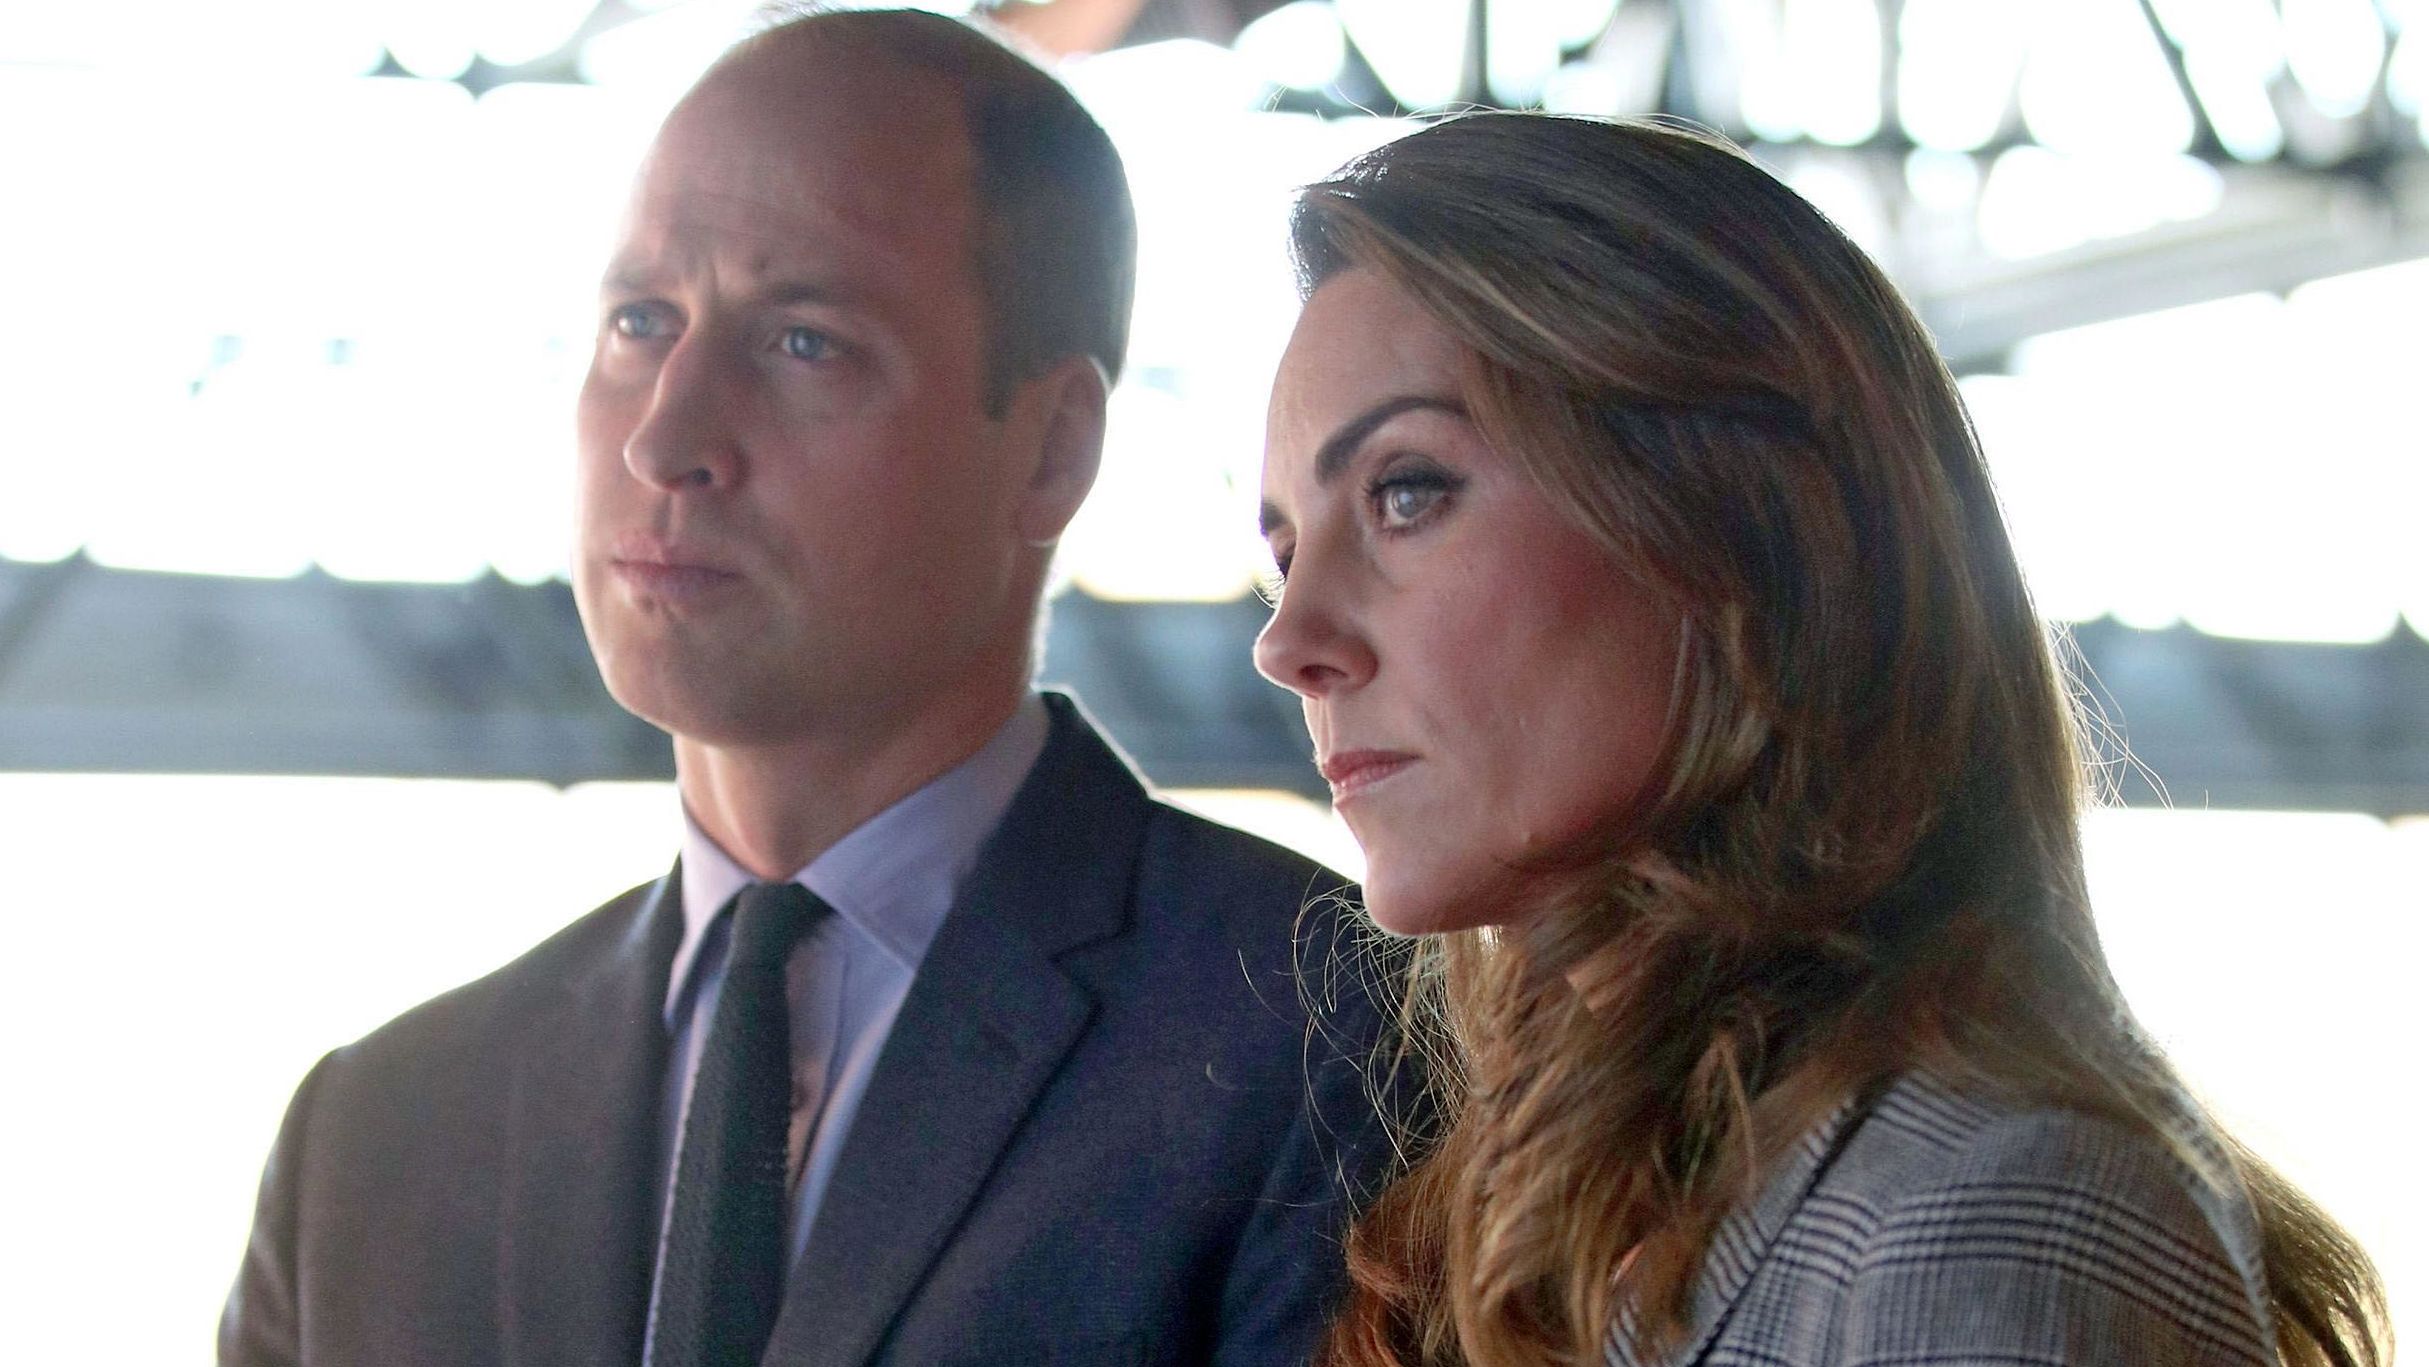 William and Kate, seen at a charity event in London in 2019